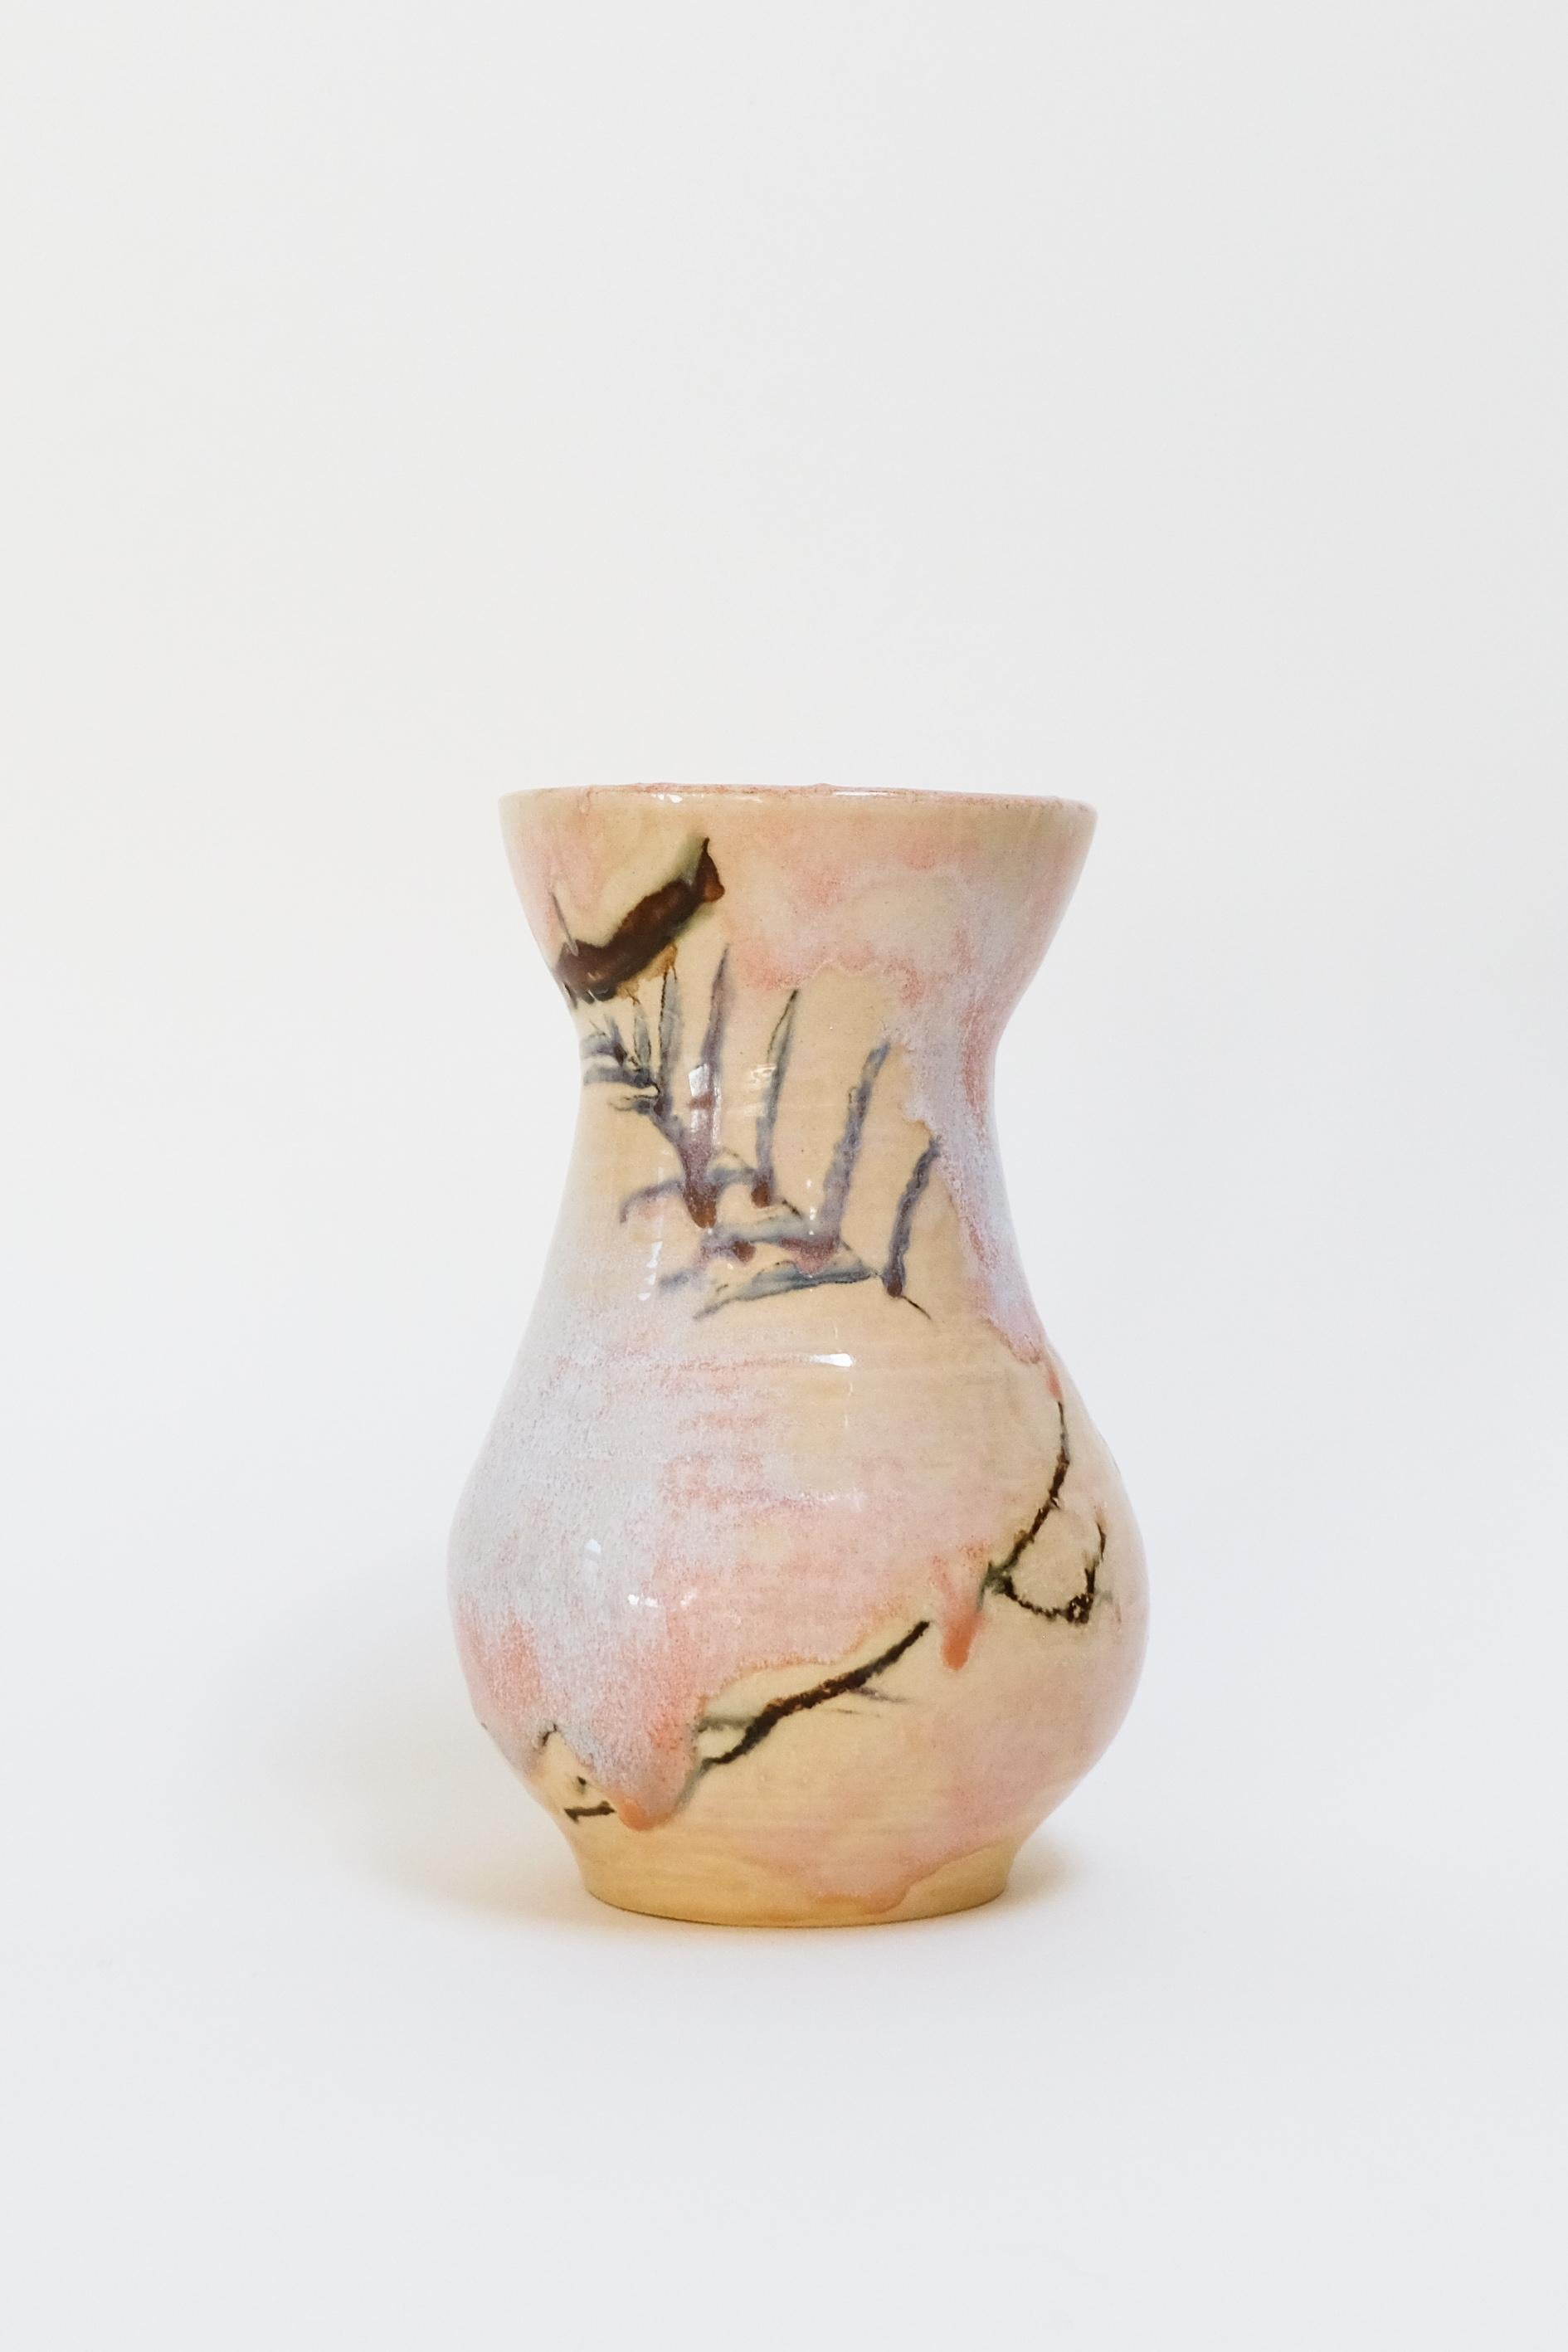 Autumn Blooms 2 - contemporary warm botanical abstract ceramic vase, functional - Contemporary Sculpture by Misbah Ahmed